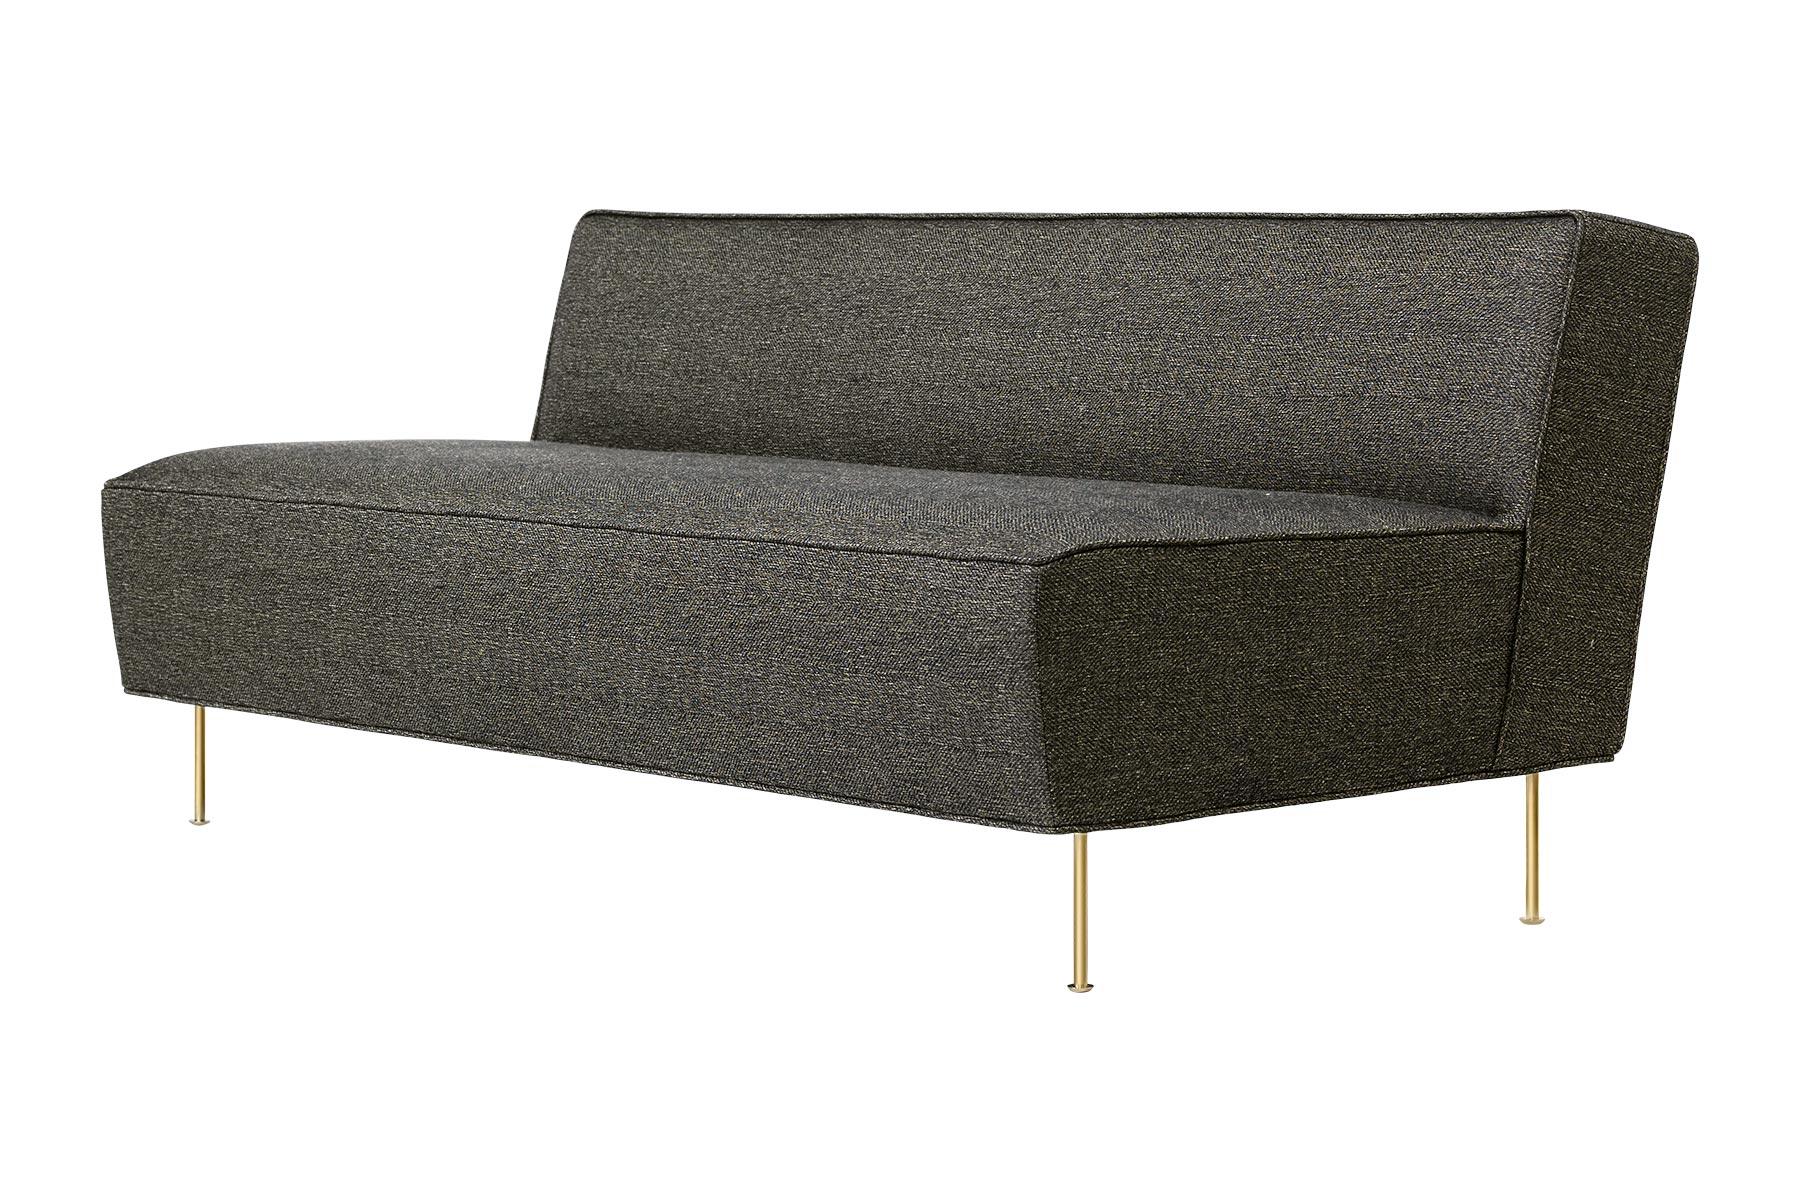 Contemporary Modern Line Sofa, Fully Upholstered, Small For Sale